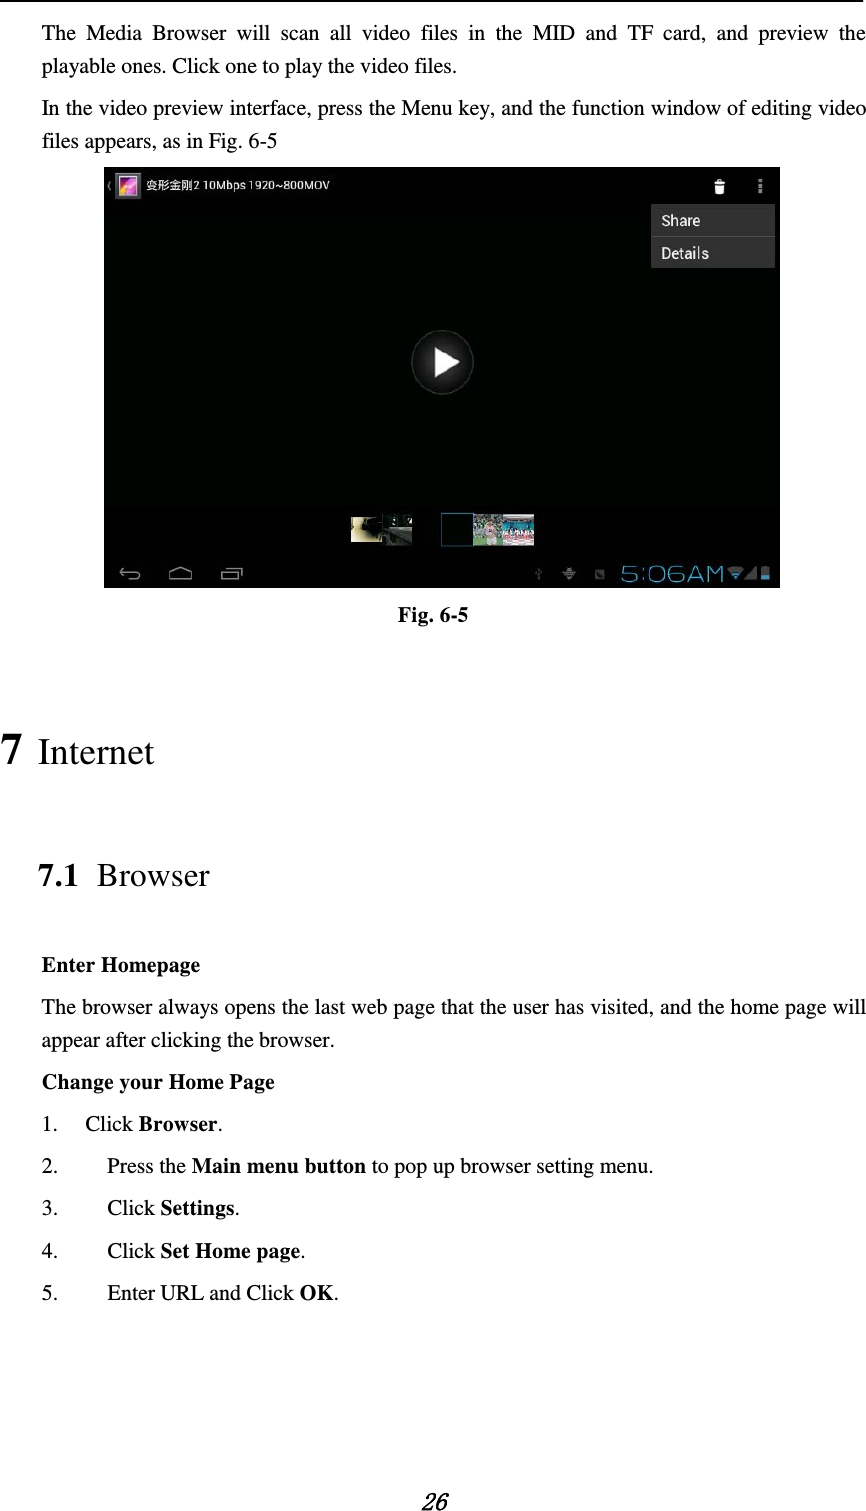    26 The Media Browser will scan all video files in the MID and TF card, and preview the playable ones. Click one to play the video files. In the video preview interface, press the Menu key, and the function window of editing video files appears, as in Fig. 6-5  Fig. 6-5 7 Internet 7.1 Browser Enter Homepage The browser always opens the last web page that the user has visited, and the home page will appear after clicking the browser. Change your Home Page 1. Click Browser. 2.   Press the Main menu button to pop up browser setting menu. 3.   Click Settings. 4.   Click Set Home page. 5.   Enter URL and Click OK.     